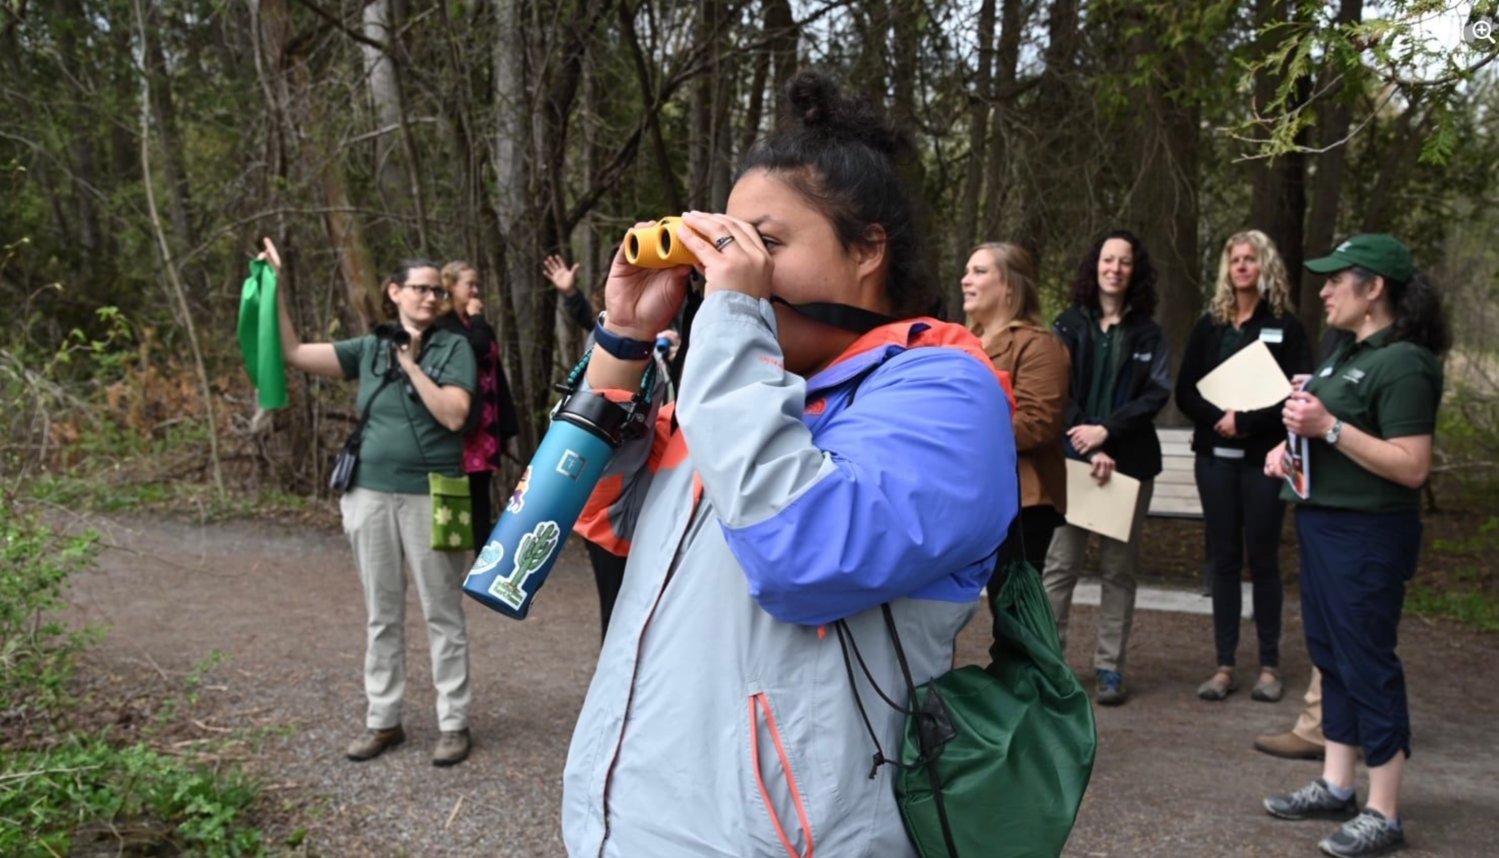 Spectators look for some feathered friends during the launch of the Central New York segment of the state birding trail.